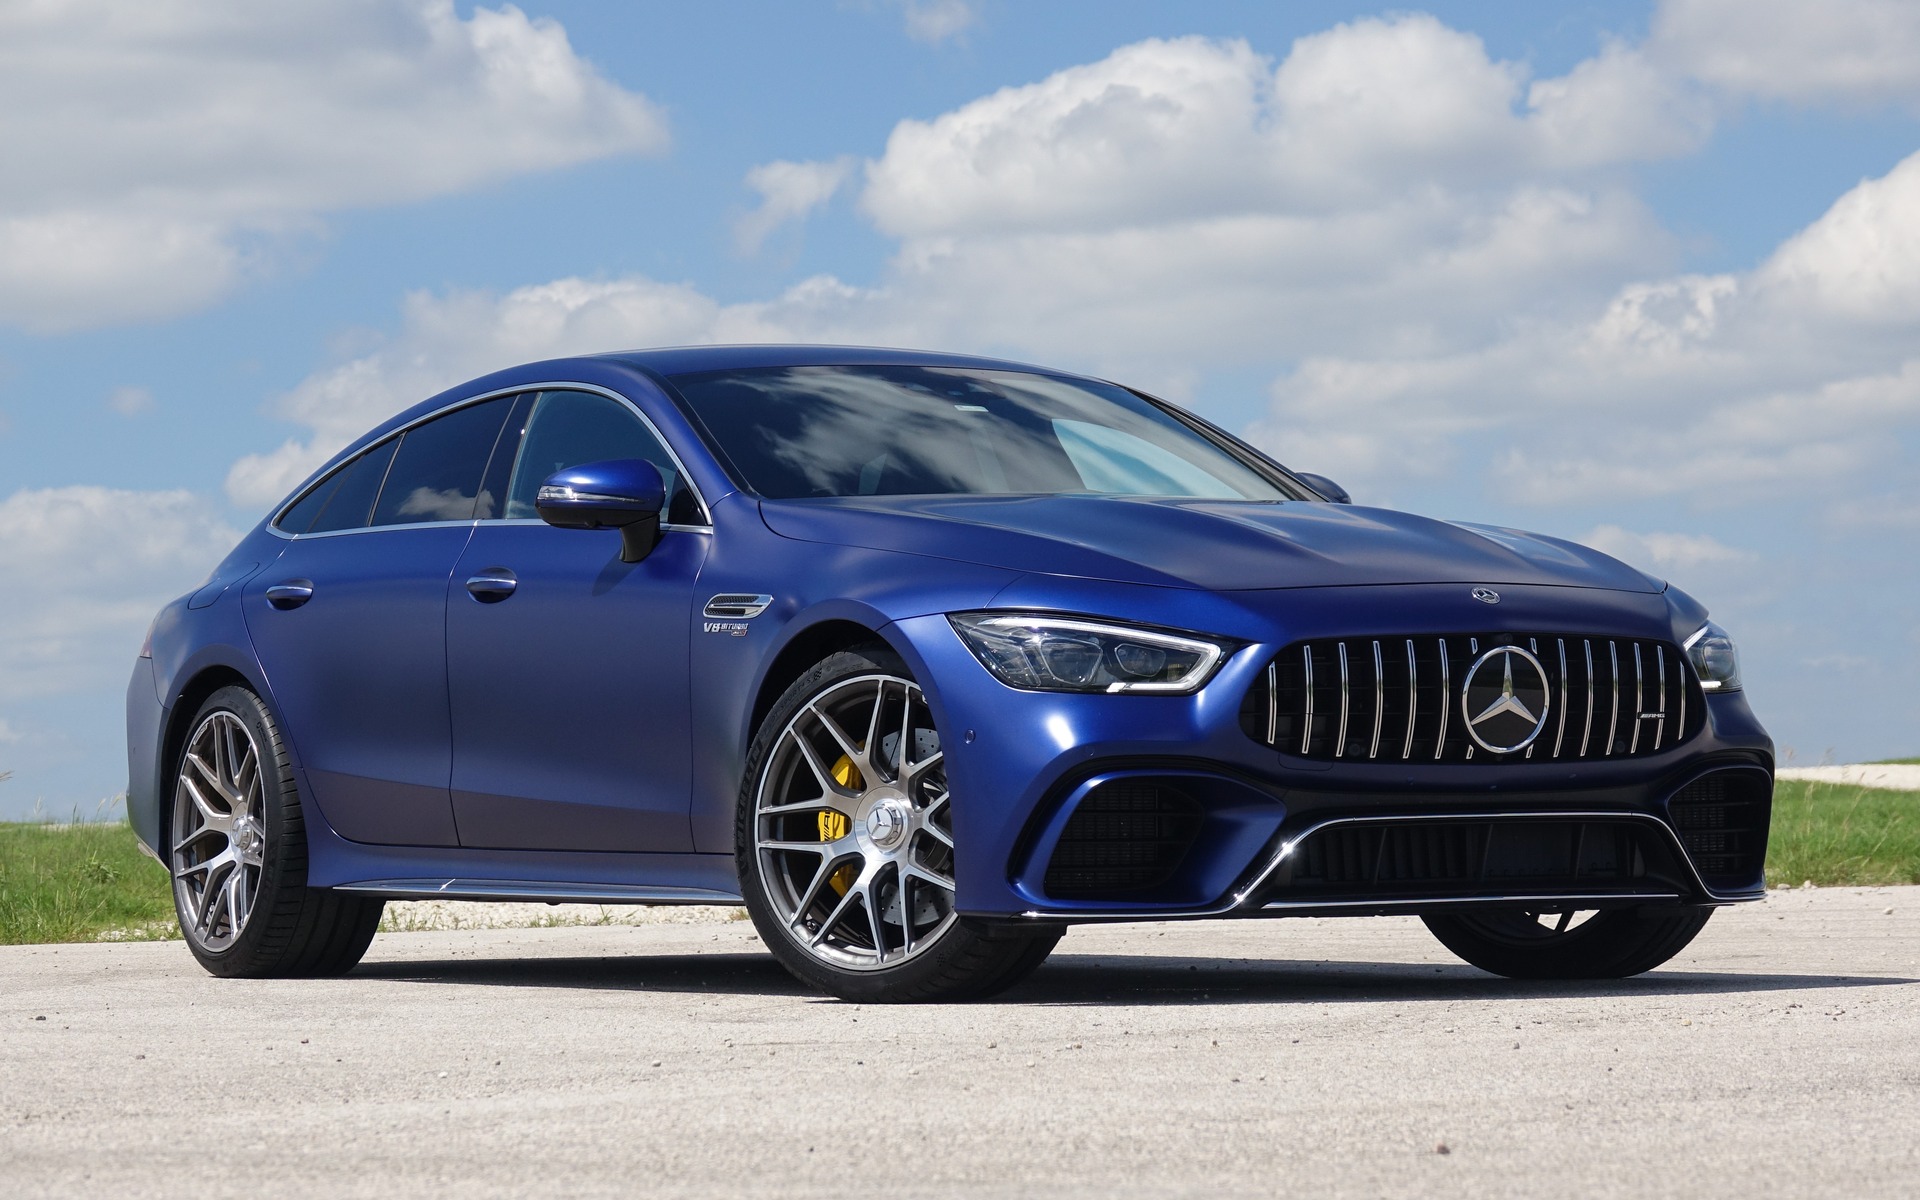 19 Mercedes Amg Gt 4 Door Coupe All Bases Covered The Car Guide